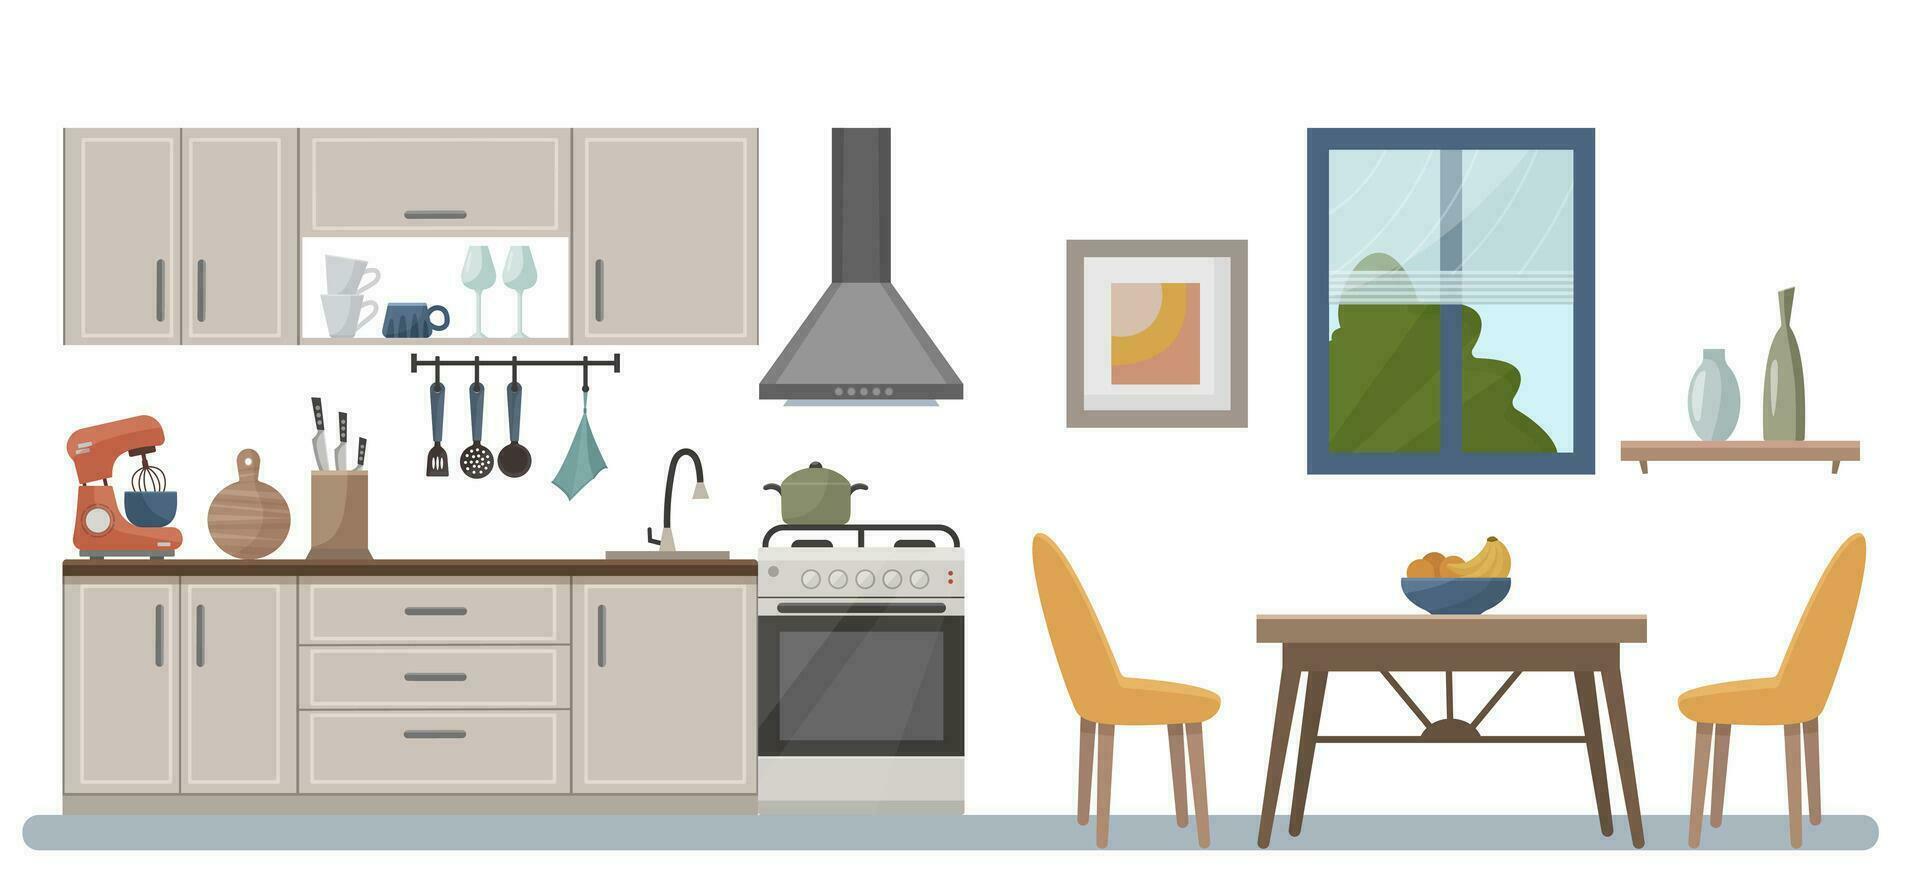 Cozy kitchen interior with furniture, stove, extractor hood. Decor for the kitchen. vector